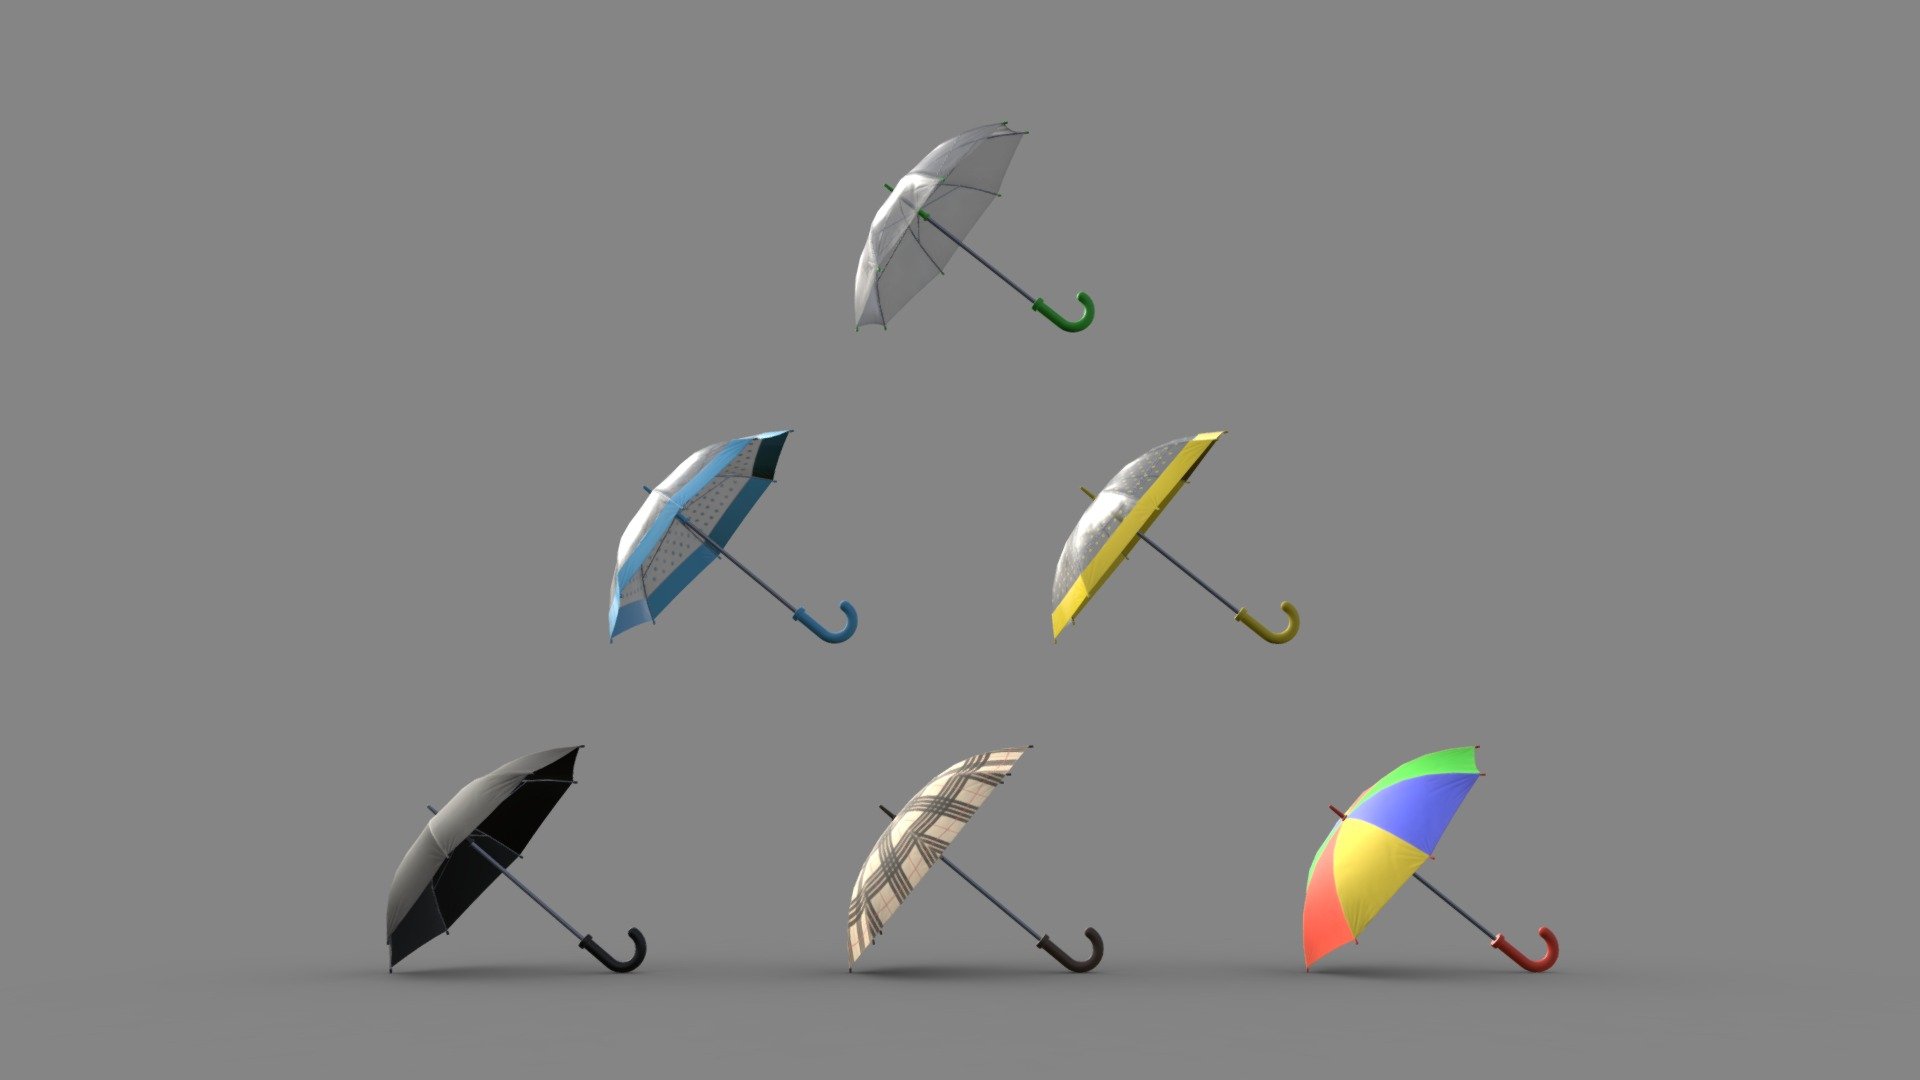 I have decided to participate in this week's challenge. I have created a small basic pack of umbrellas. For the plastic versions, I put the opacity in refraction mode because it gives me a more interesting result. I set the refraction index to 1 and the roughness to 0.1. The files include the low and high base umbrella model 3d model